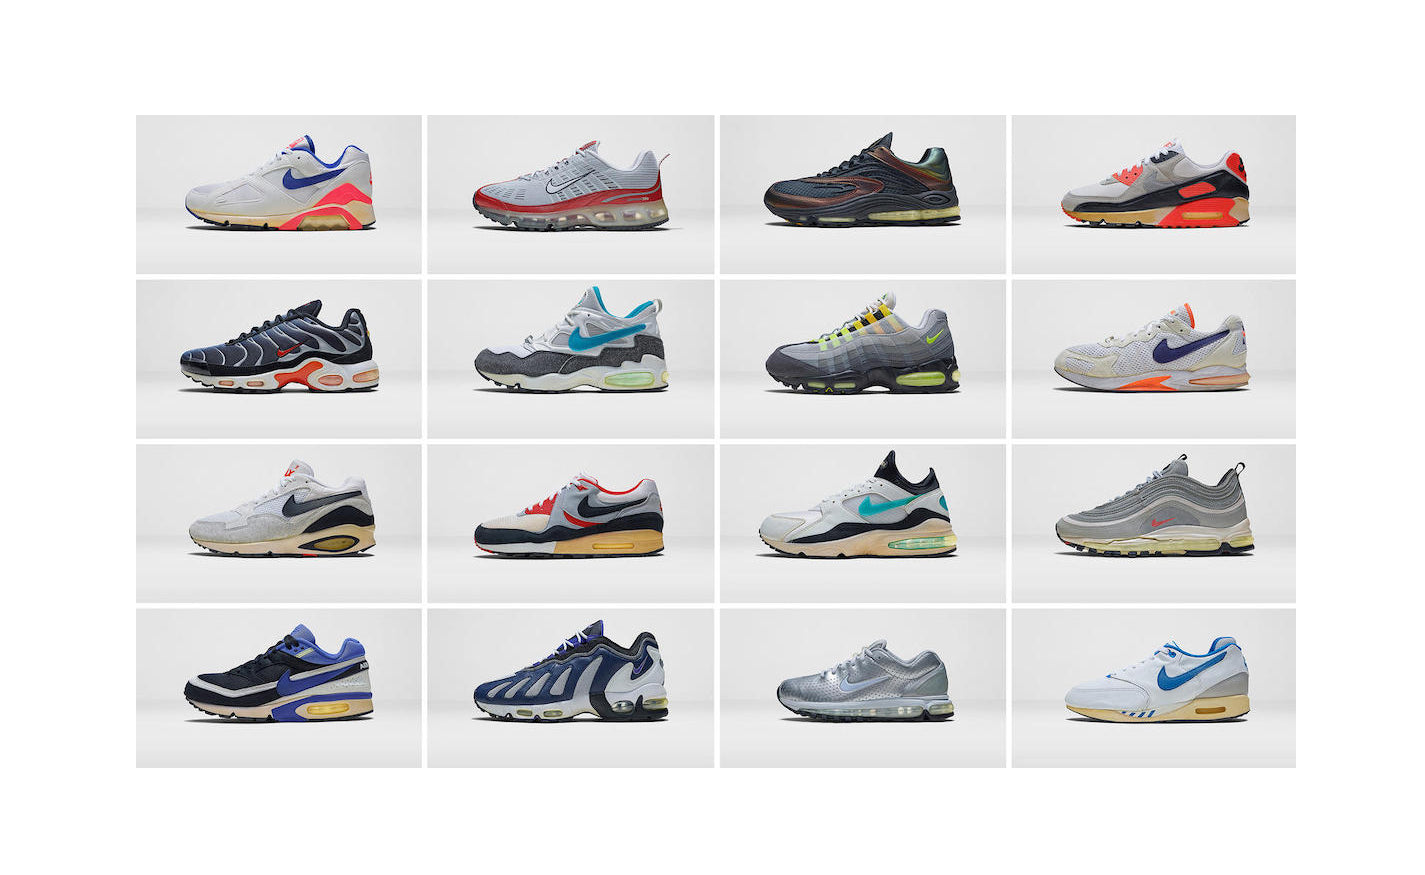 A Brief History Of The Nike Air Max Series